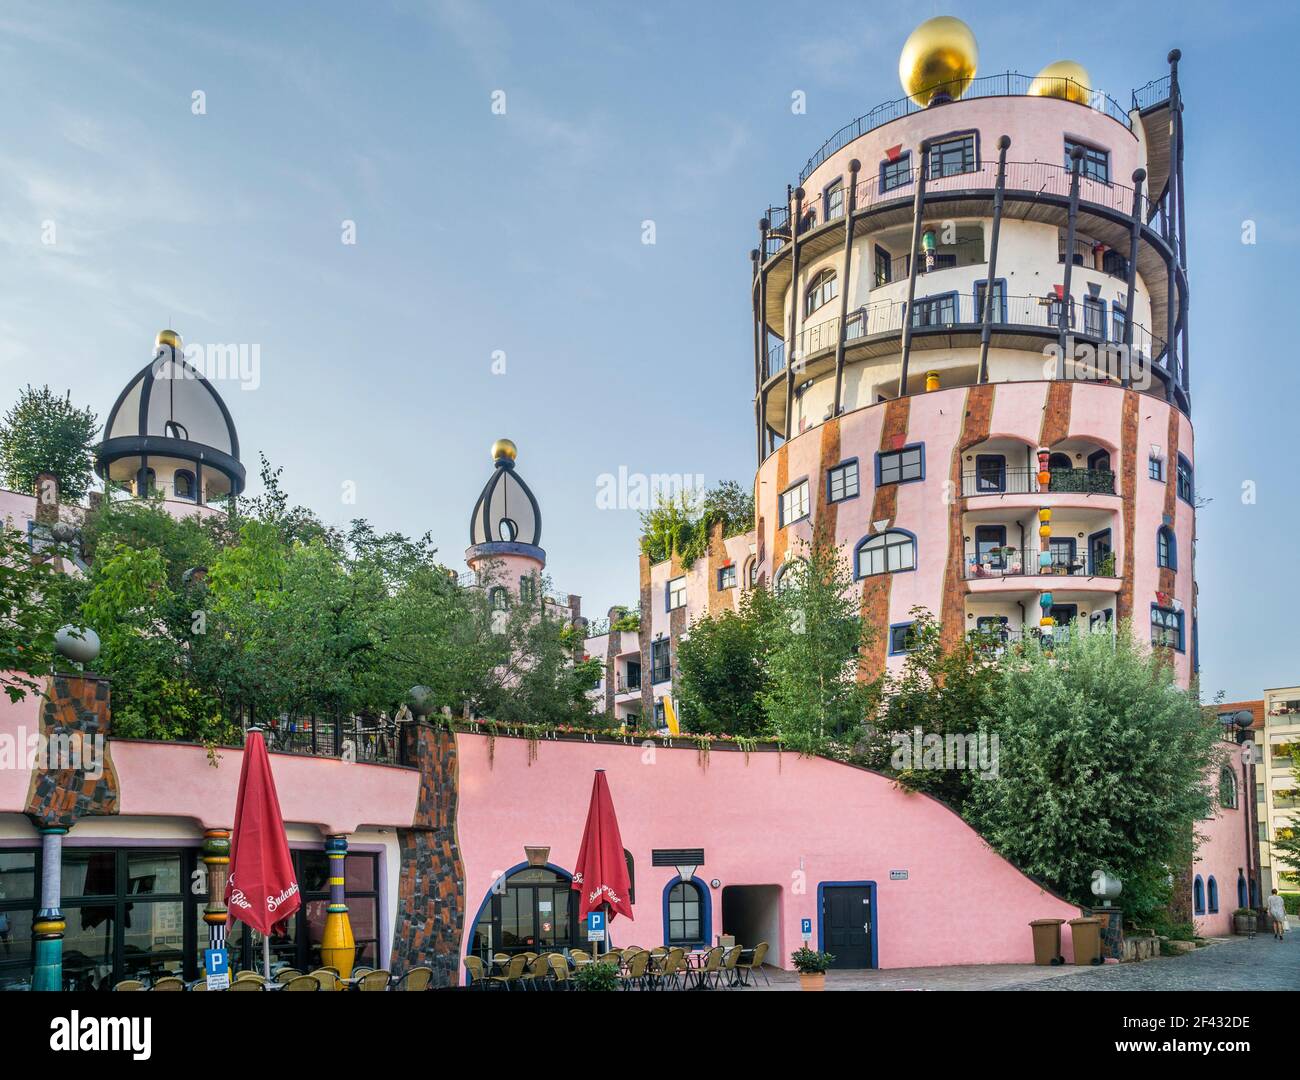 'Die Grüne Zitadelle' or The Green Citadel of Magdeburg, a large, pink building of a modern architectural style designed by Friedensreich Hundertwasse Stock Photo